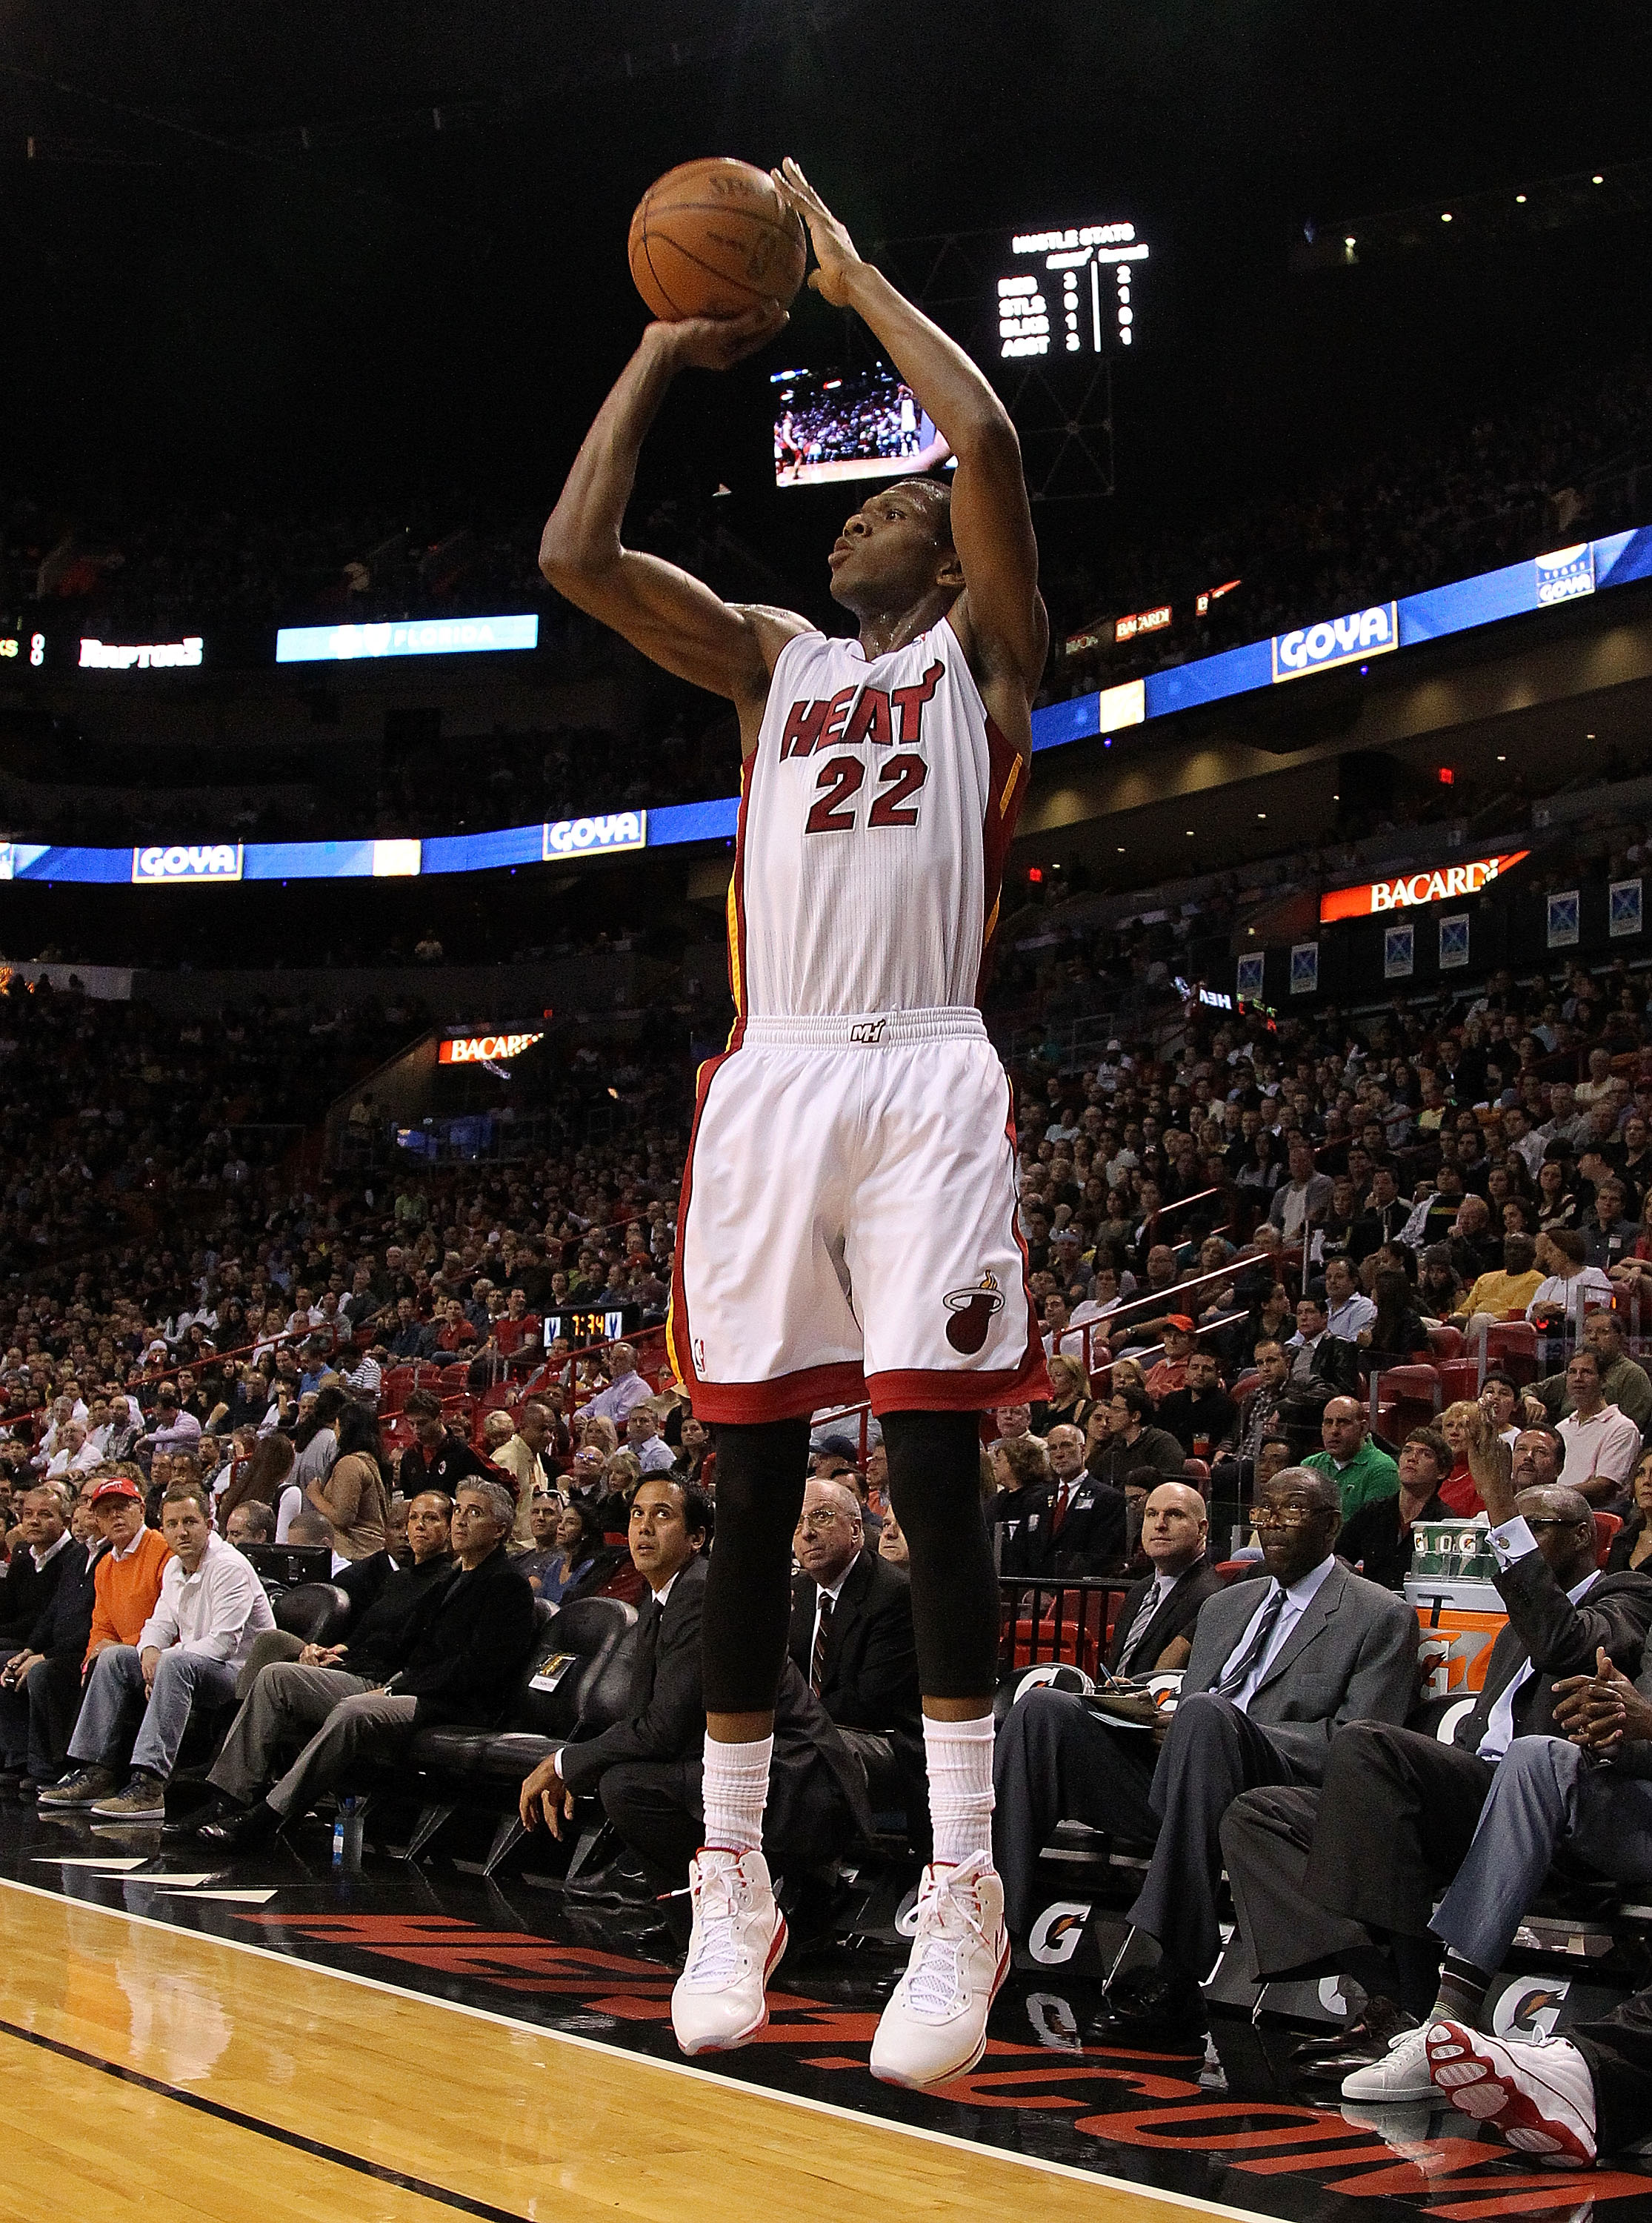 MIAMI, FL - JANUARY 22: James Jones #22 of the Miami Heat shoots a jumpshot during a game against the Toronto Raptors at American Airlines Arena on January 22, 2011 in Miami, Florida. NOTE TO USER: User expressly acknowledges and agrees that, by downloadi